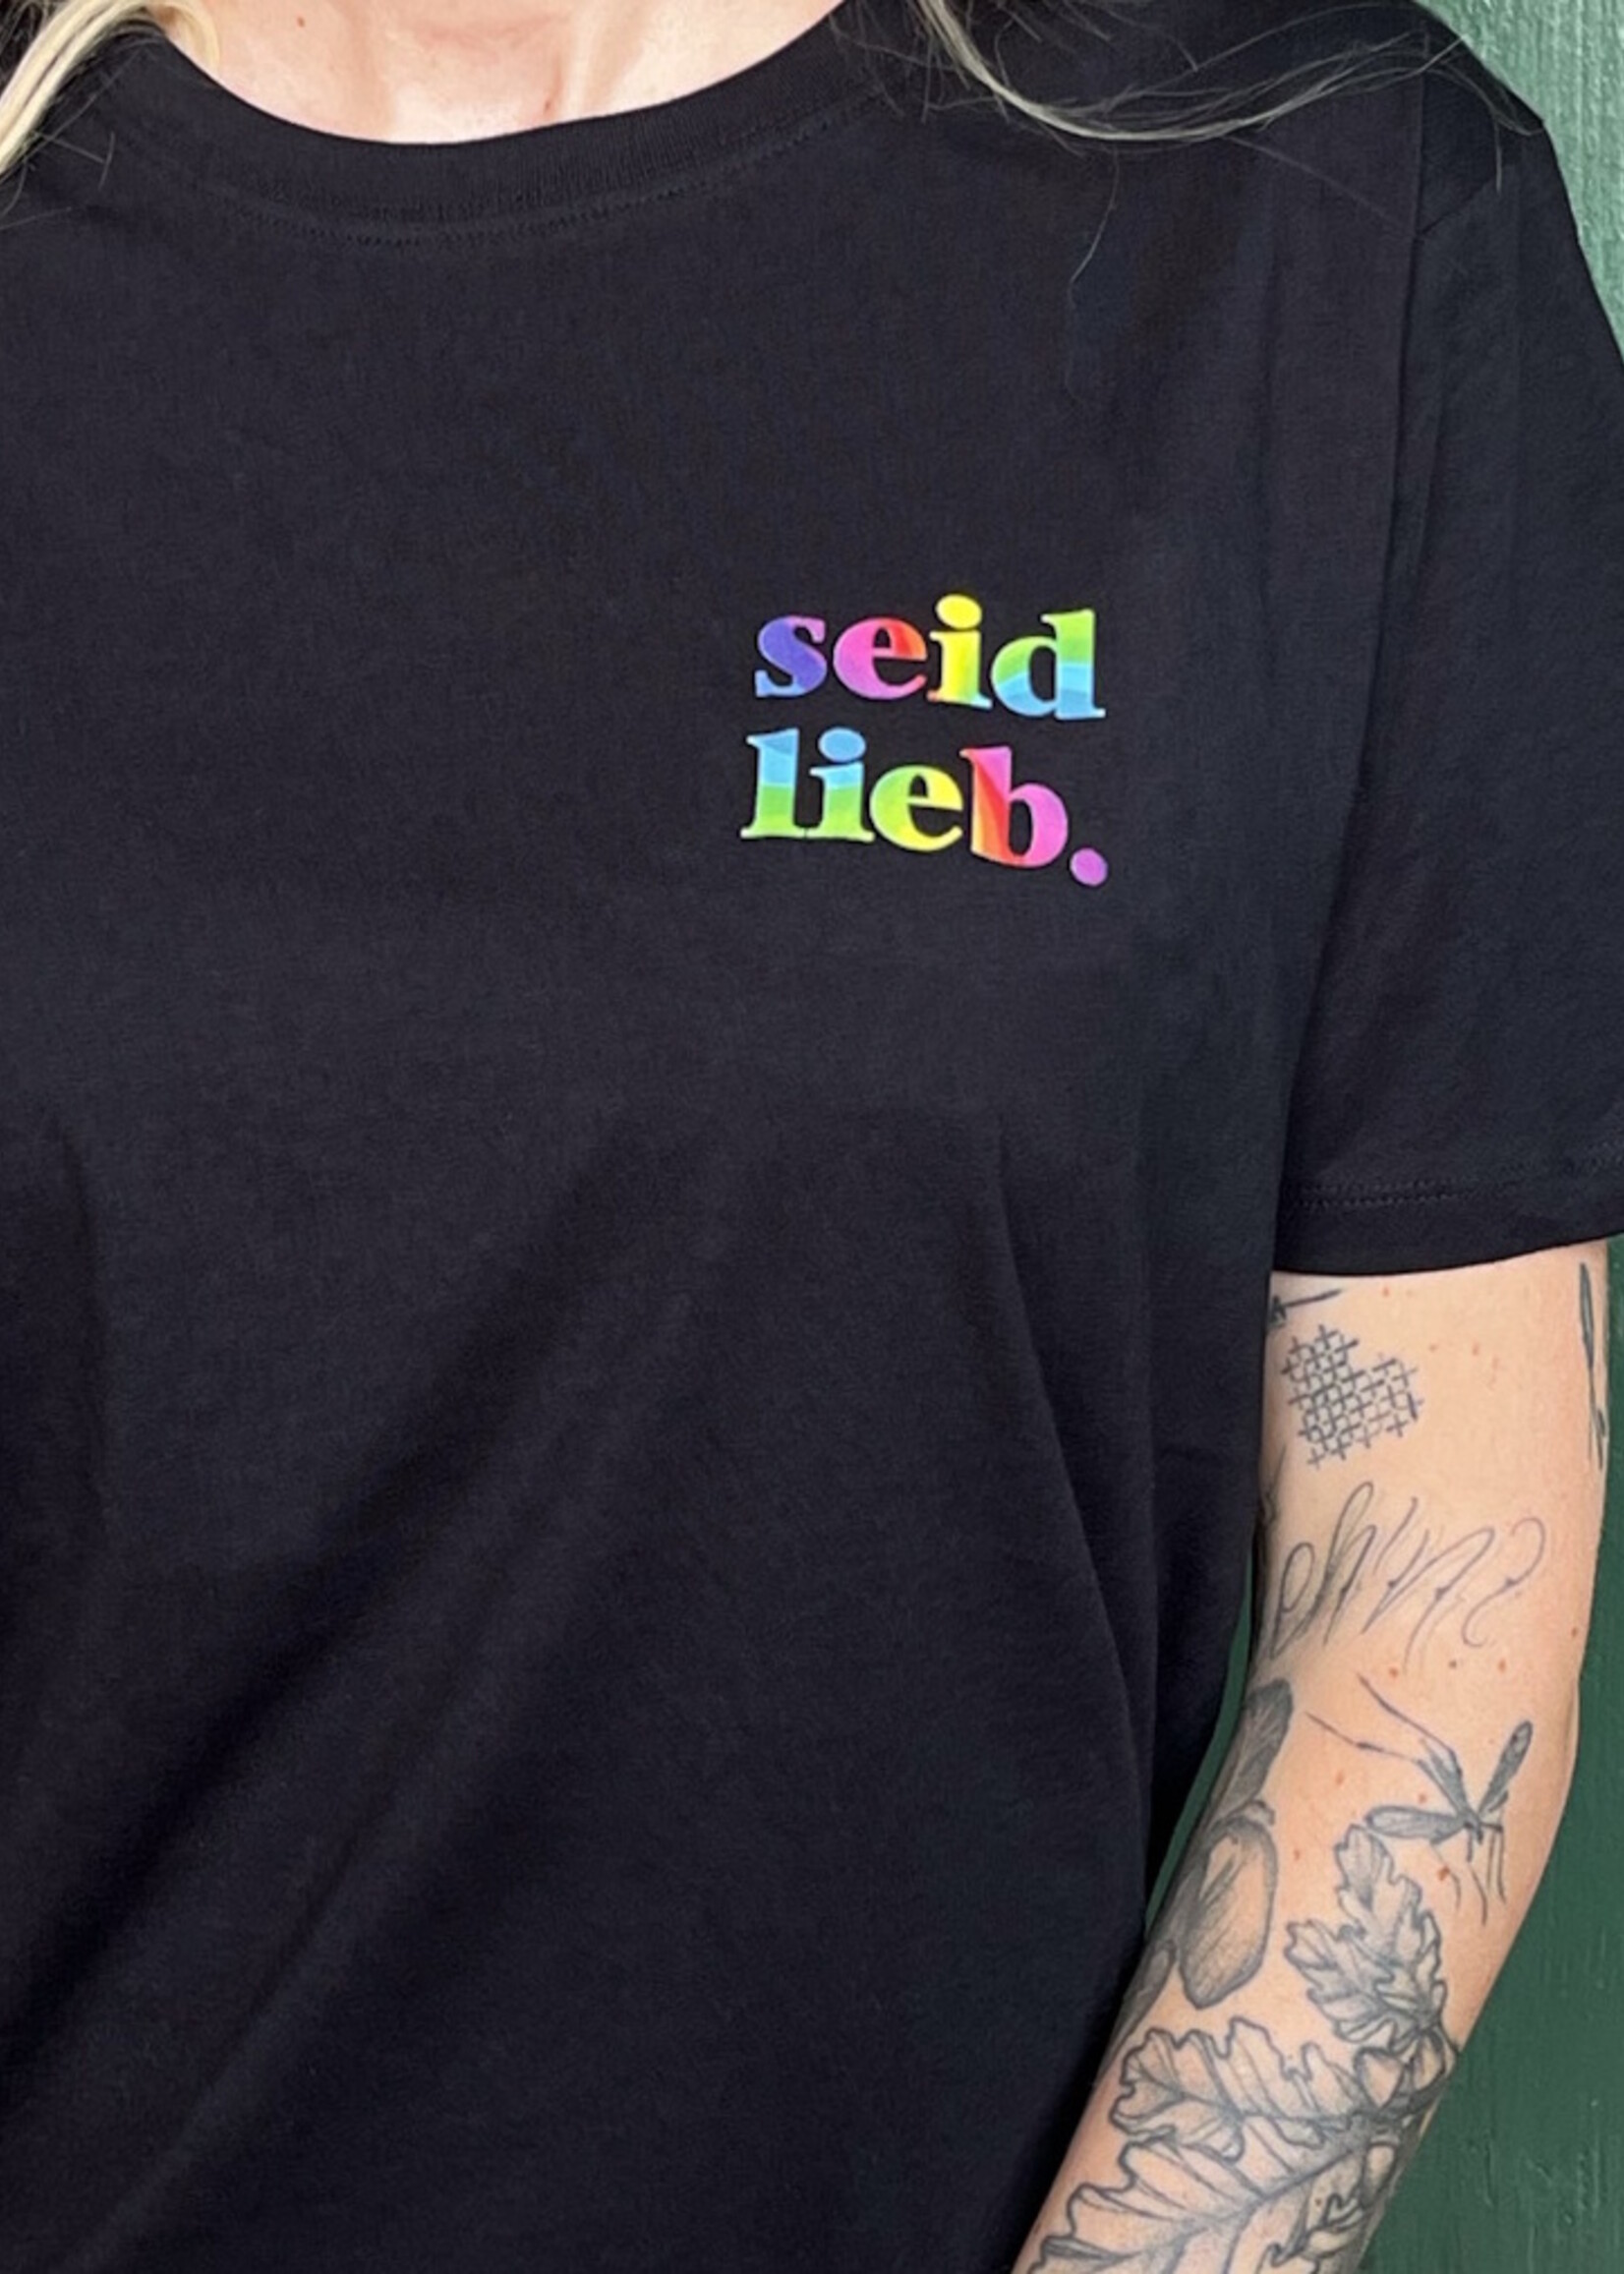 seid lieb.  cooperationshirt - straight cut with white on black lettering on the front